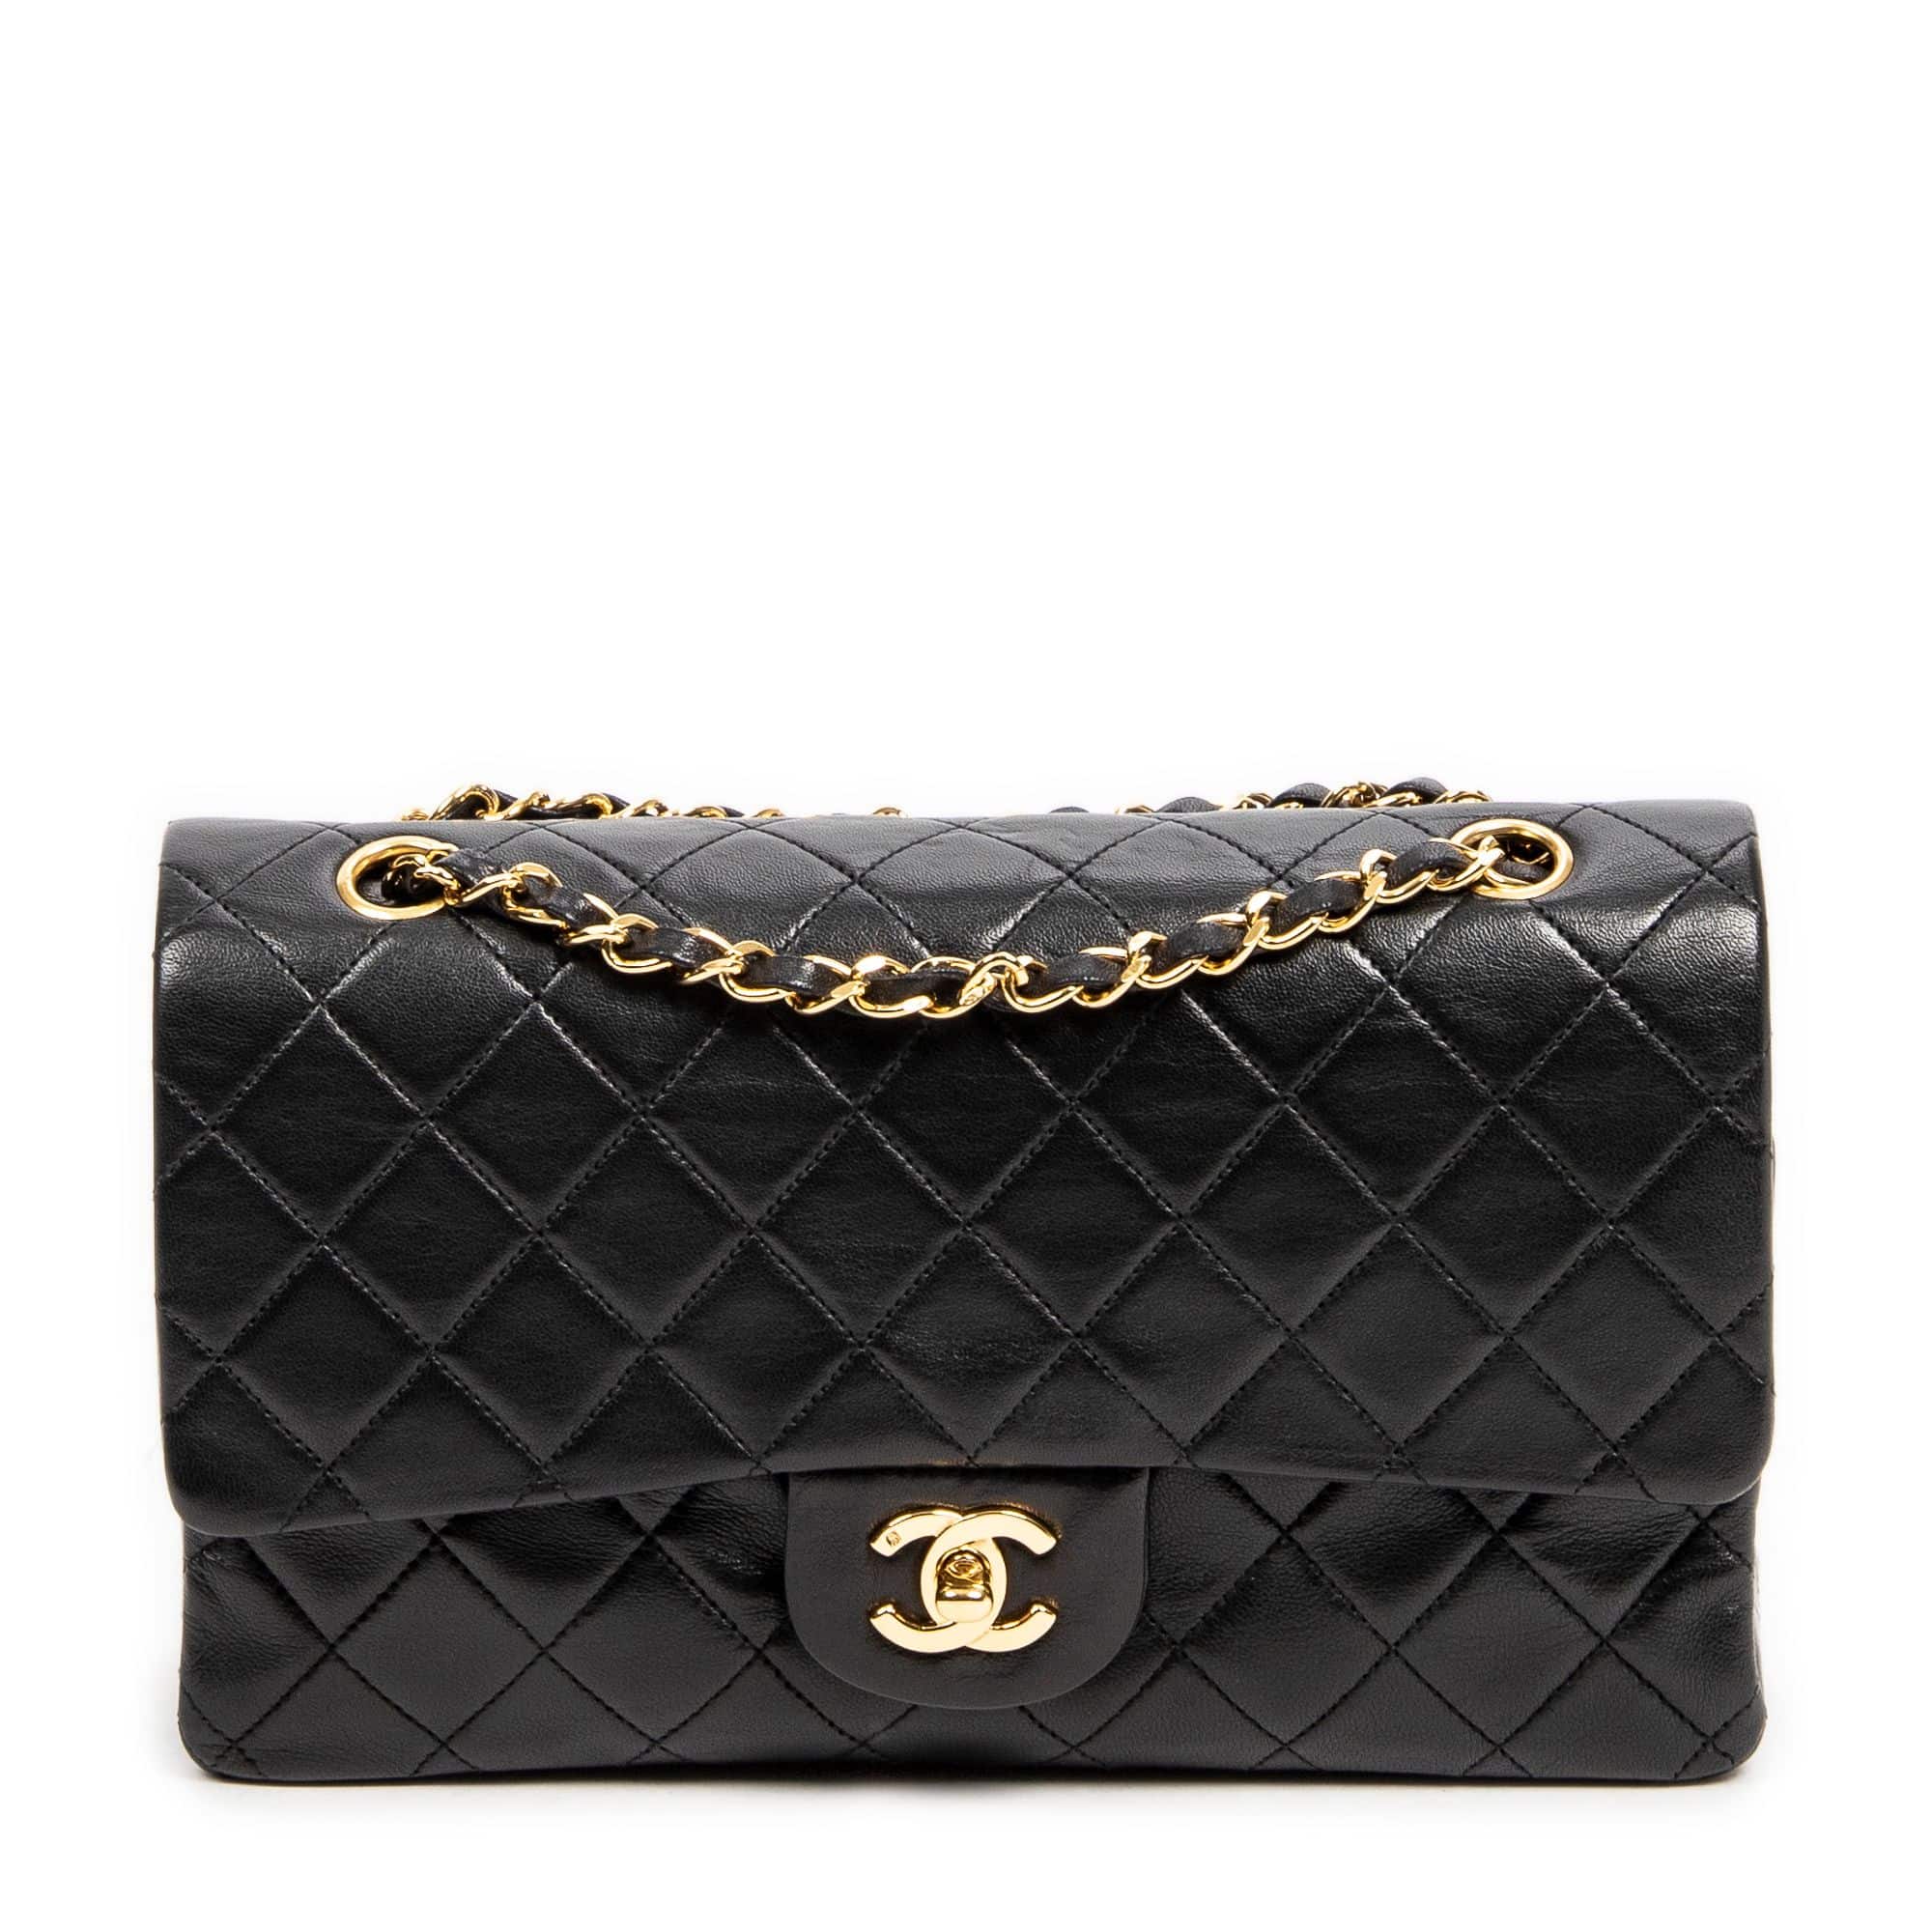 Sold at Auction: Chanel Classic Double Flap Gold Python Purse